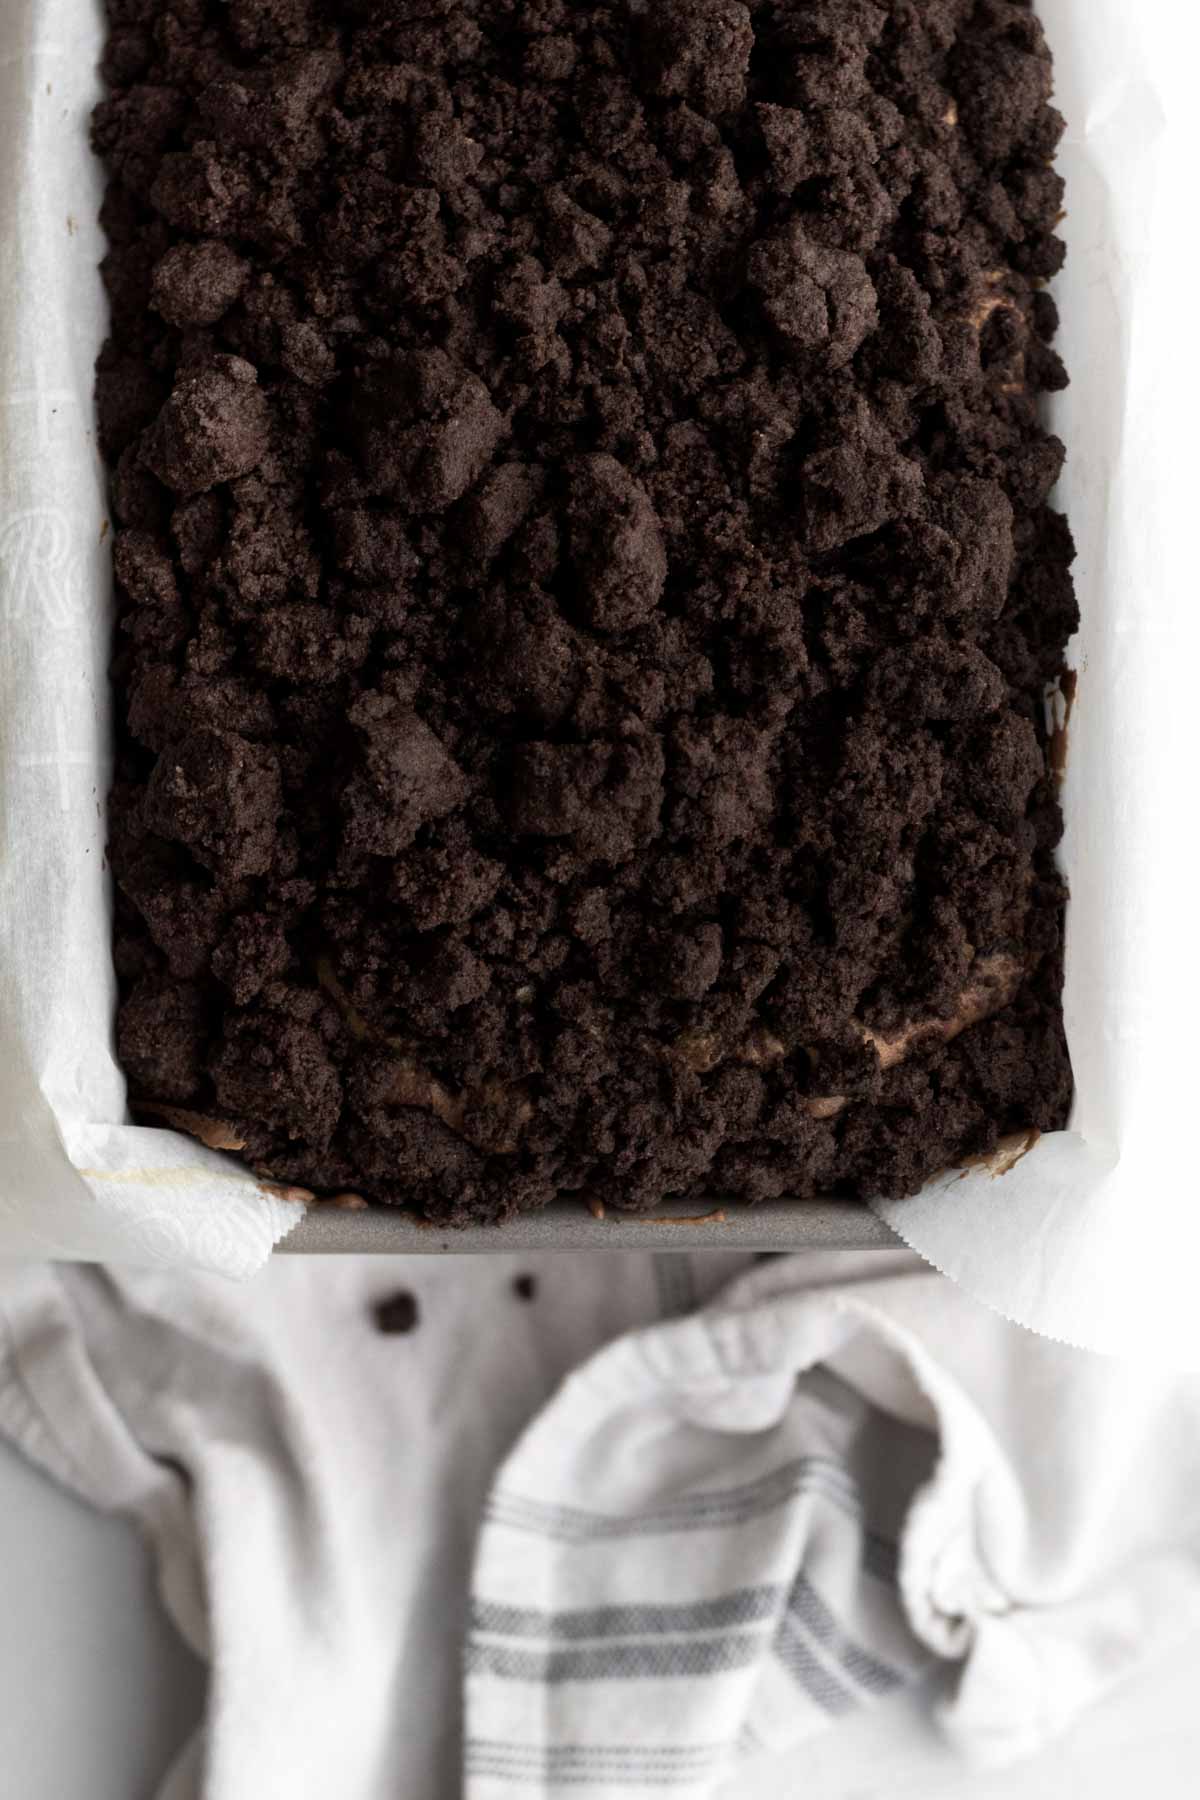 Baked loaf cake with chocolate crumbles in a pan.